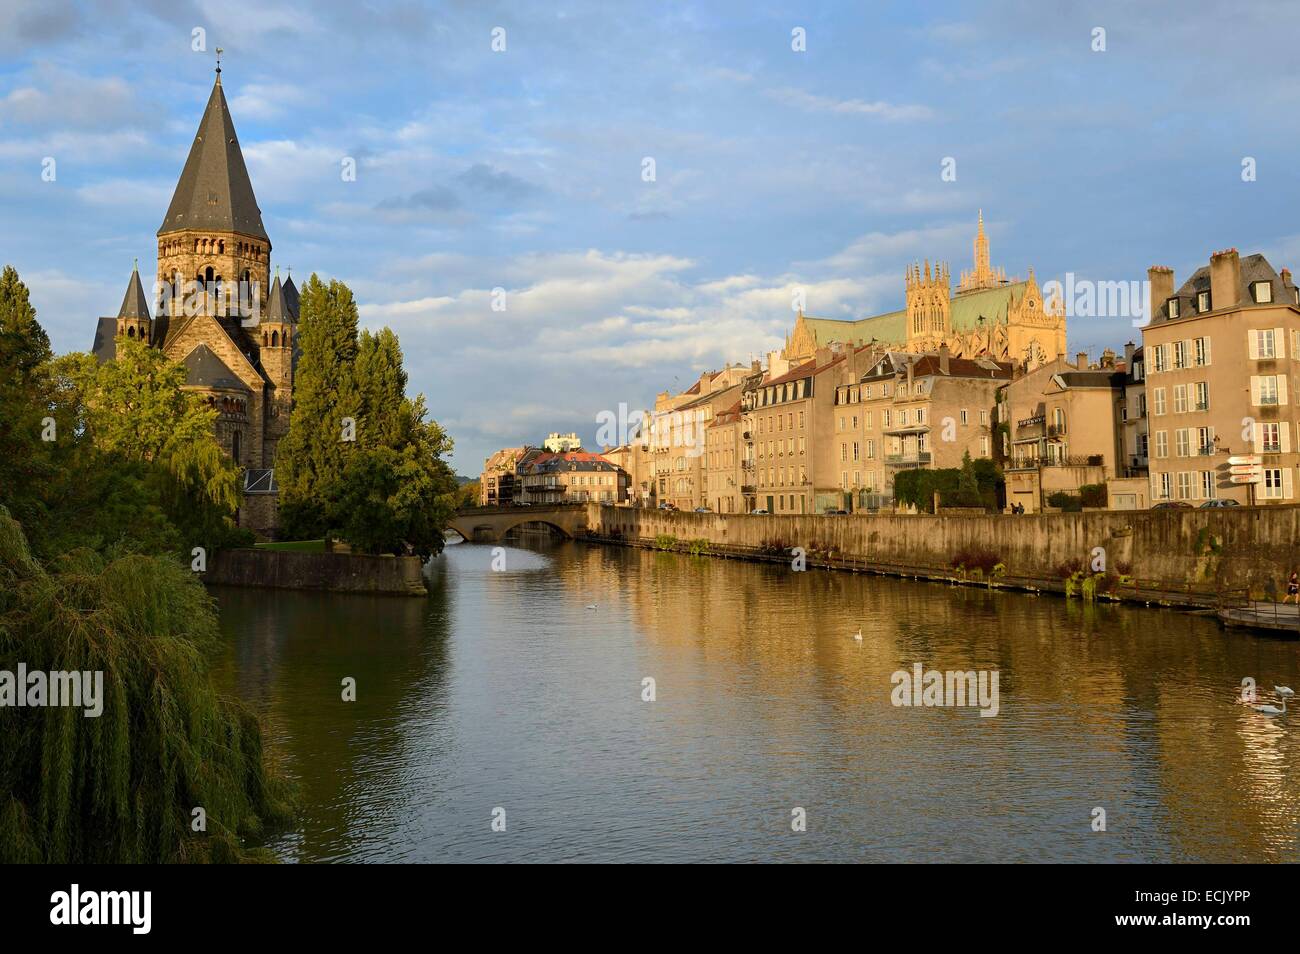 France, Moselle, Metz, Ile du Petit Saulcy, the Temple Neuf also called Eglise des allemands (the New Temple or Church of the Germans) reformed Prostestant Shrine and the canalized River Moselle banks with the Saint Etienne cathedral in the background rig Stock Photo